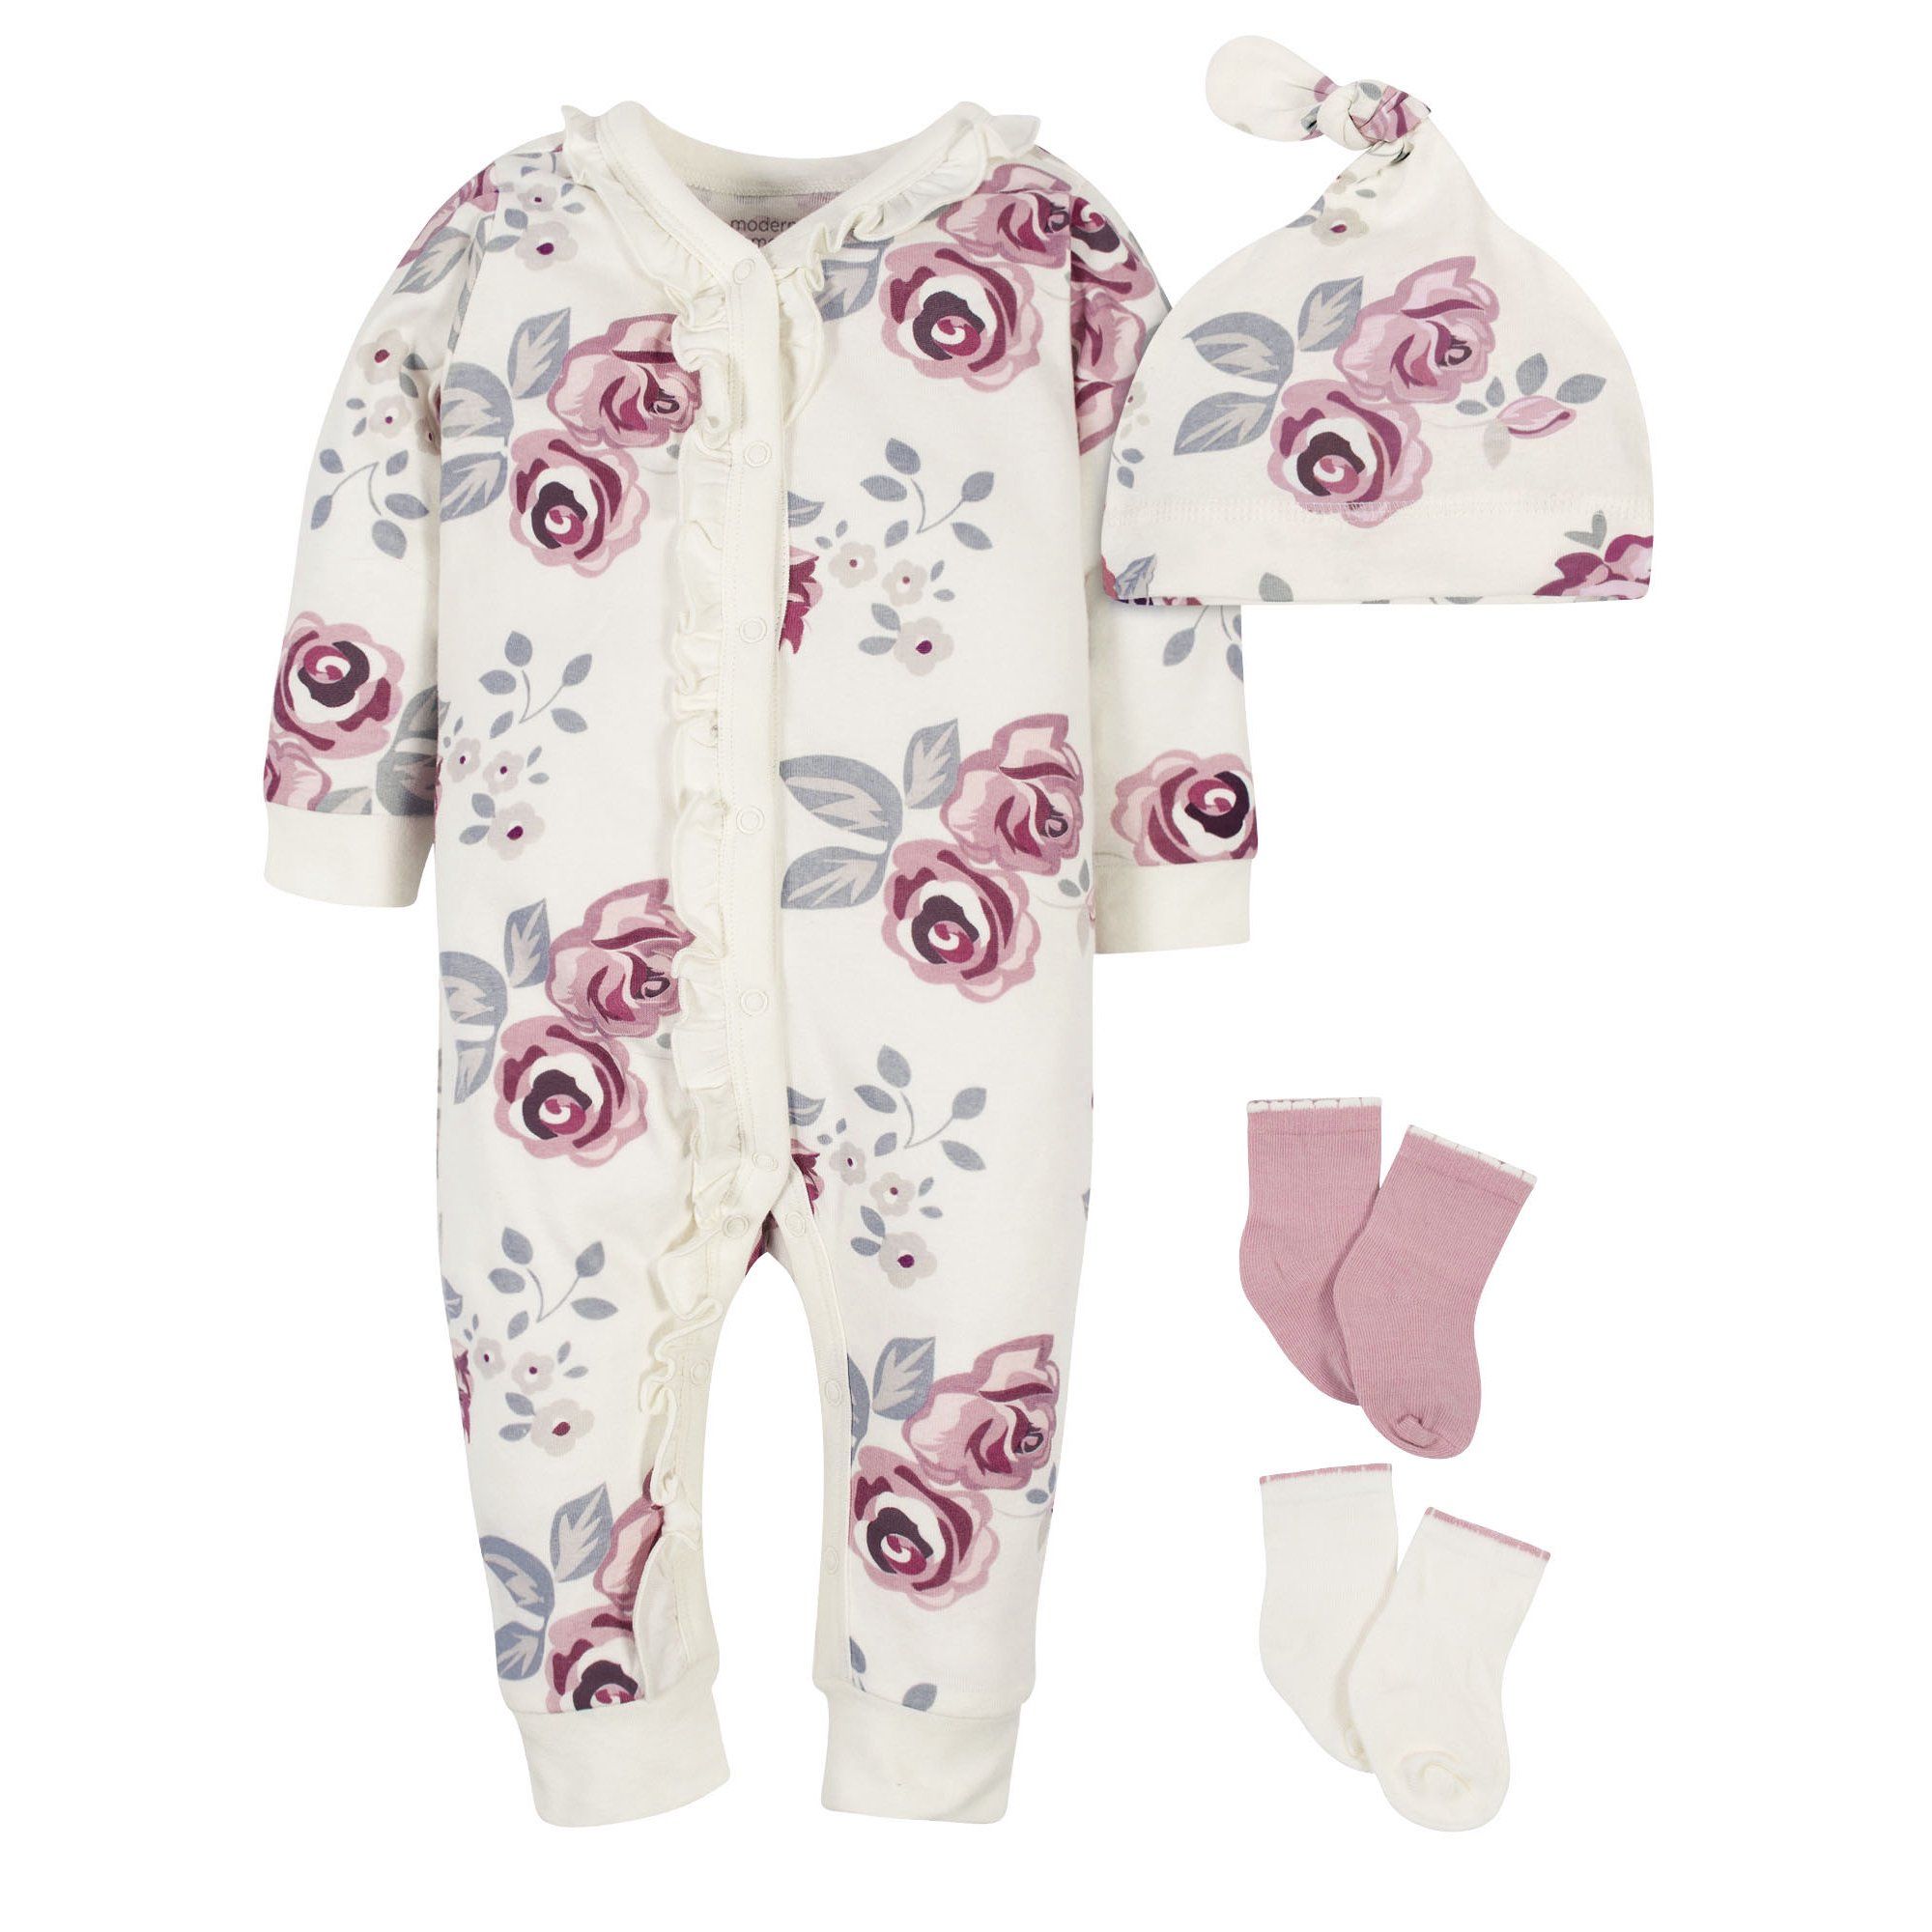 Modern Moments by Gerber Baby Girl Coverall, Cap and Socks Set, 4-Piece | Walmart (US)